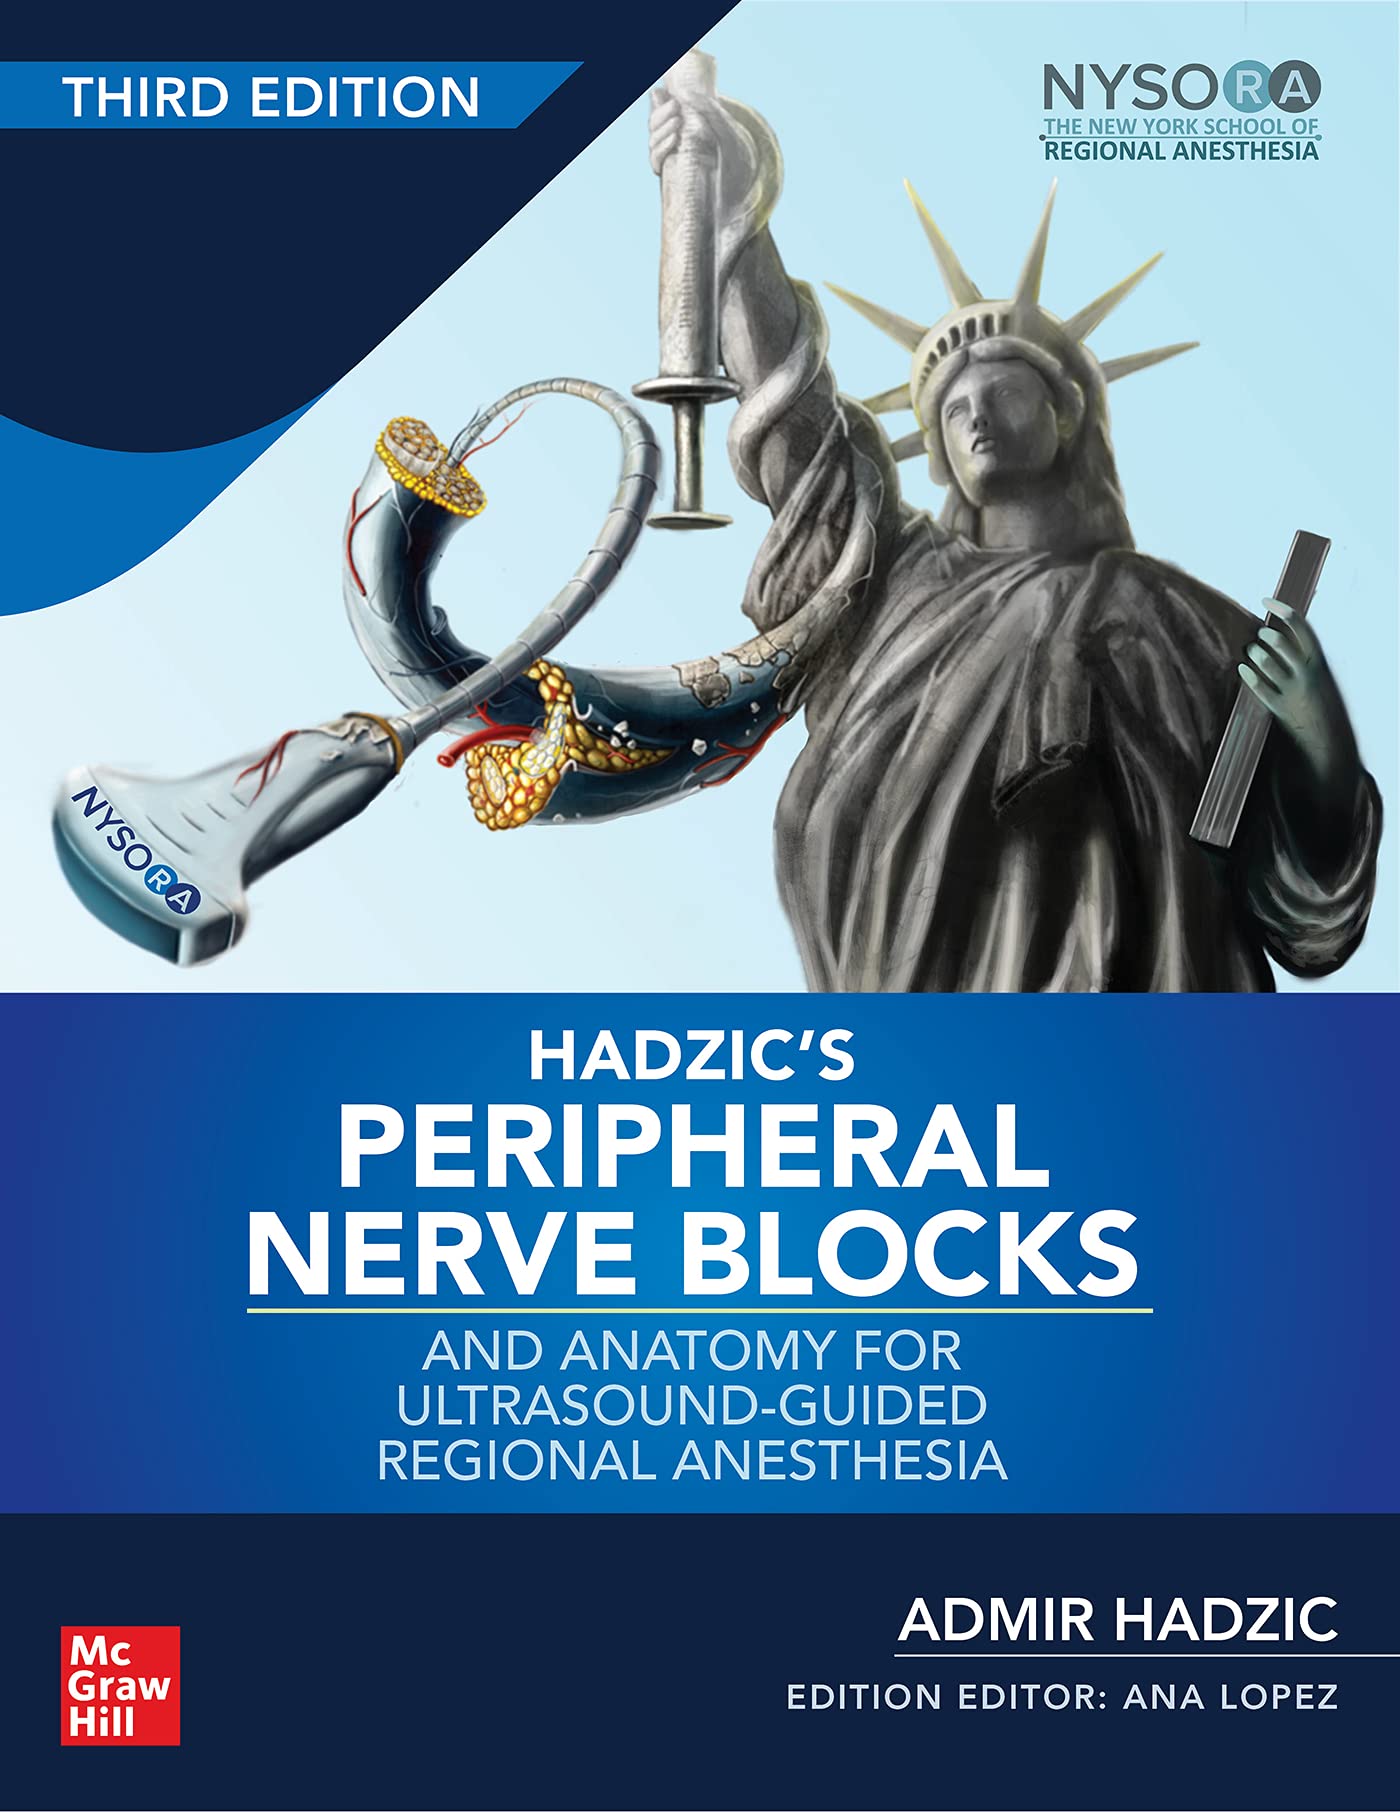 hadzics-peripheral-nerve-blocks-and-anatomy-for-ultrasound-guided-regional-anesthesia